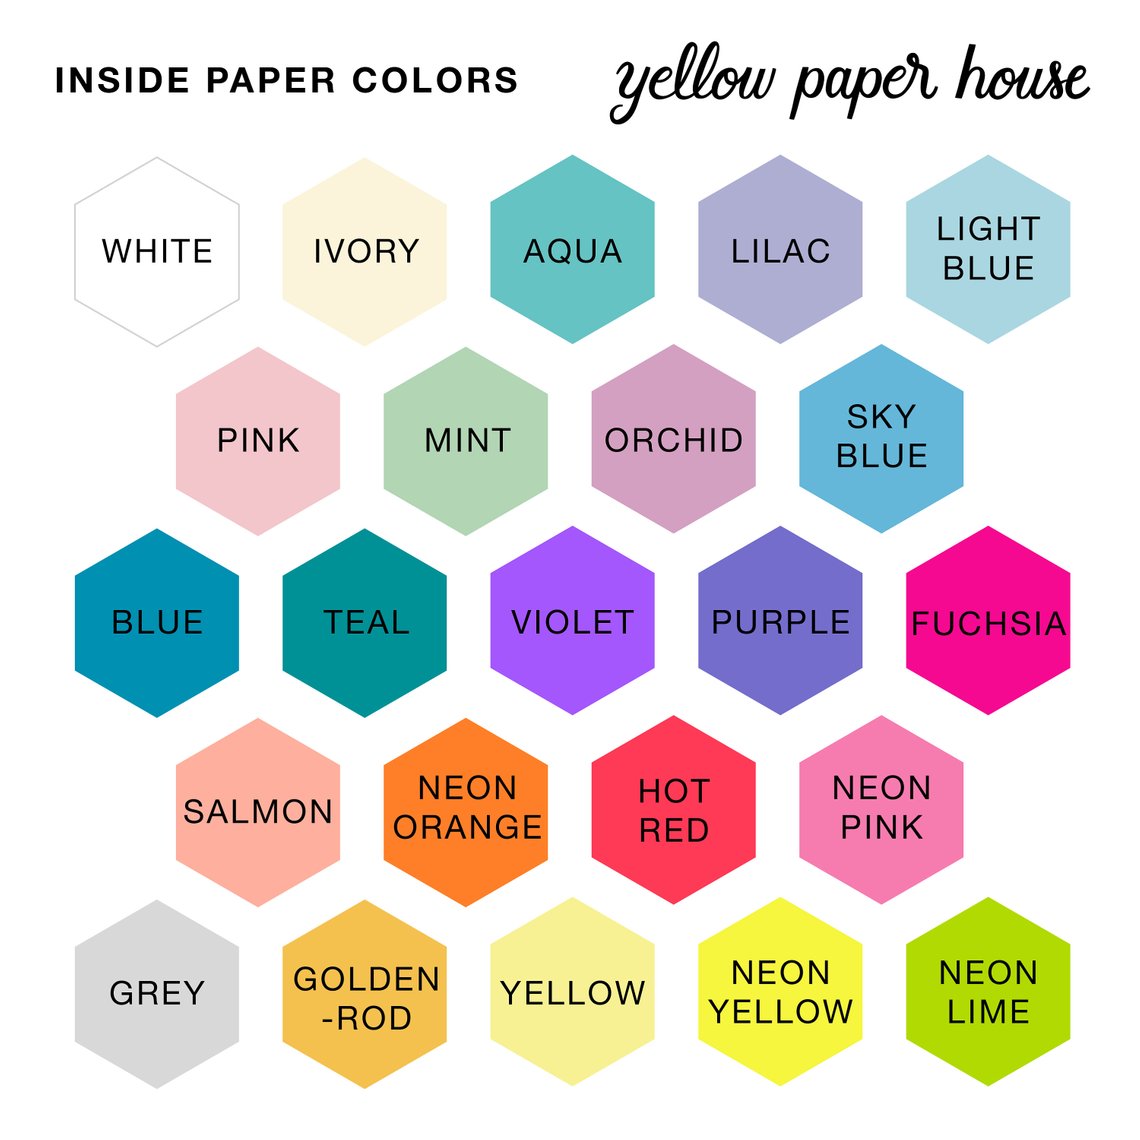 Spiral Book Review/Club Notebook – Yellow Paper House